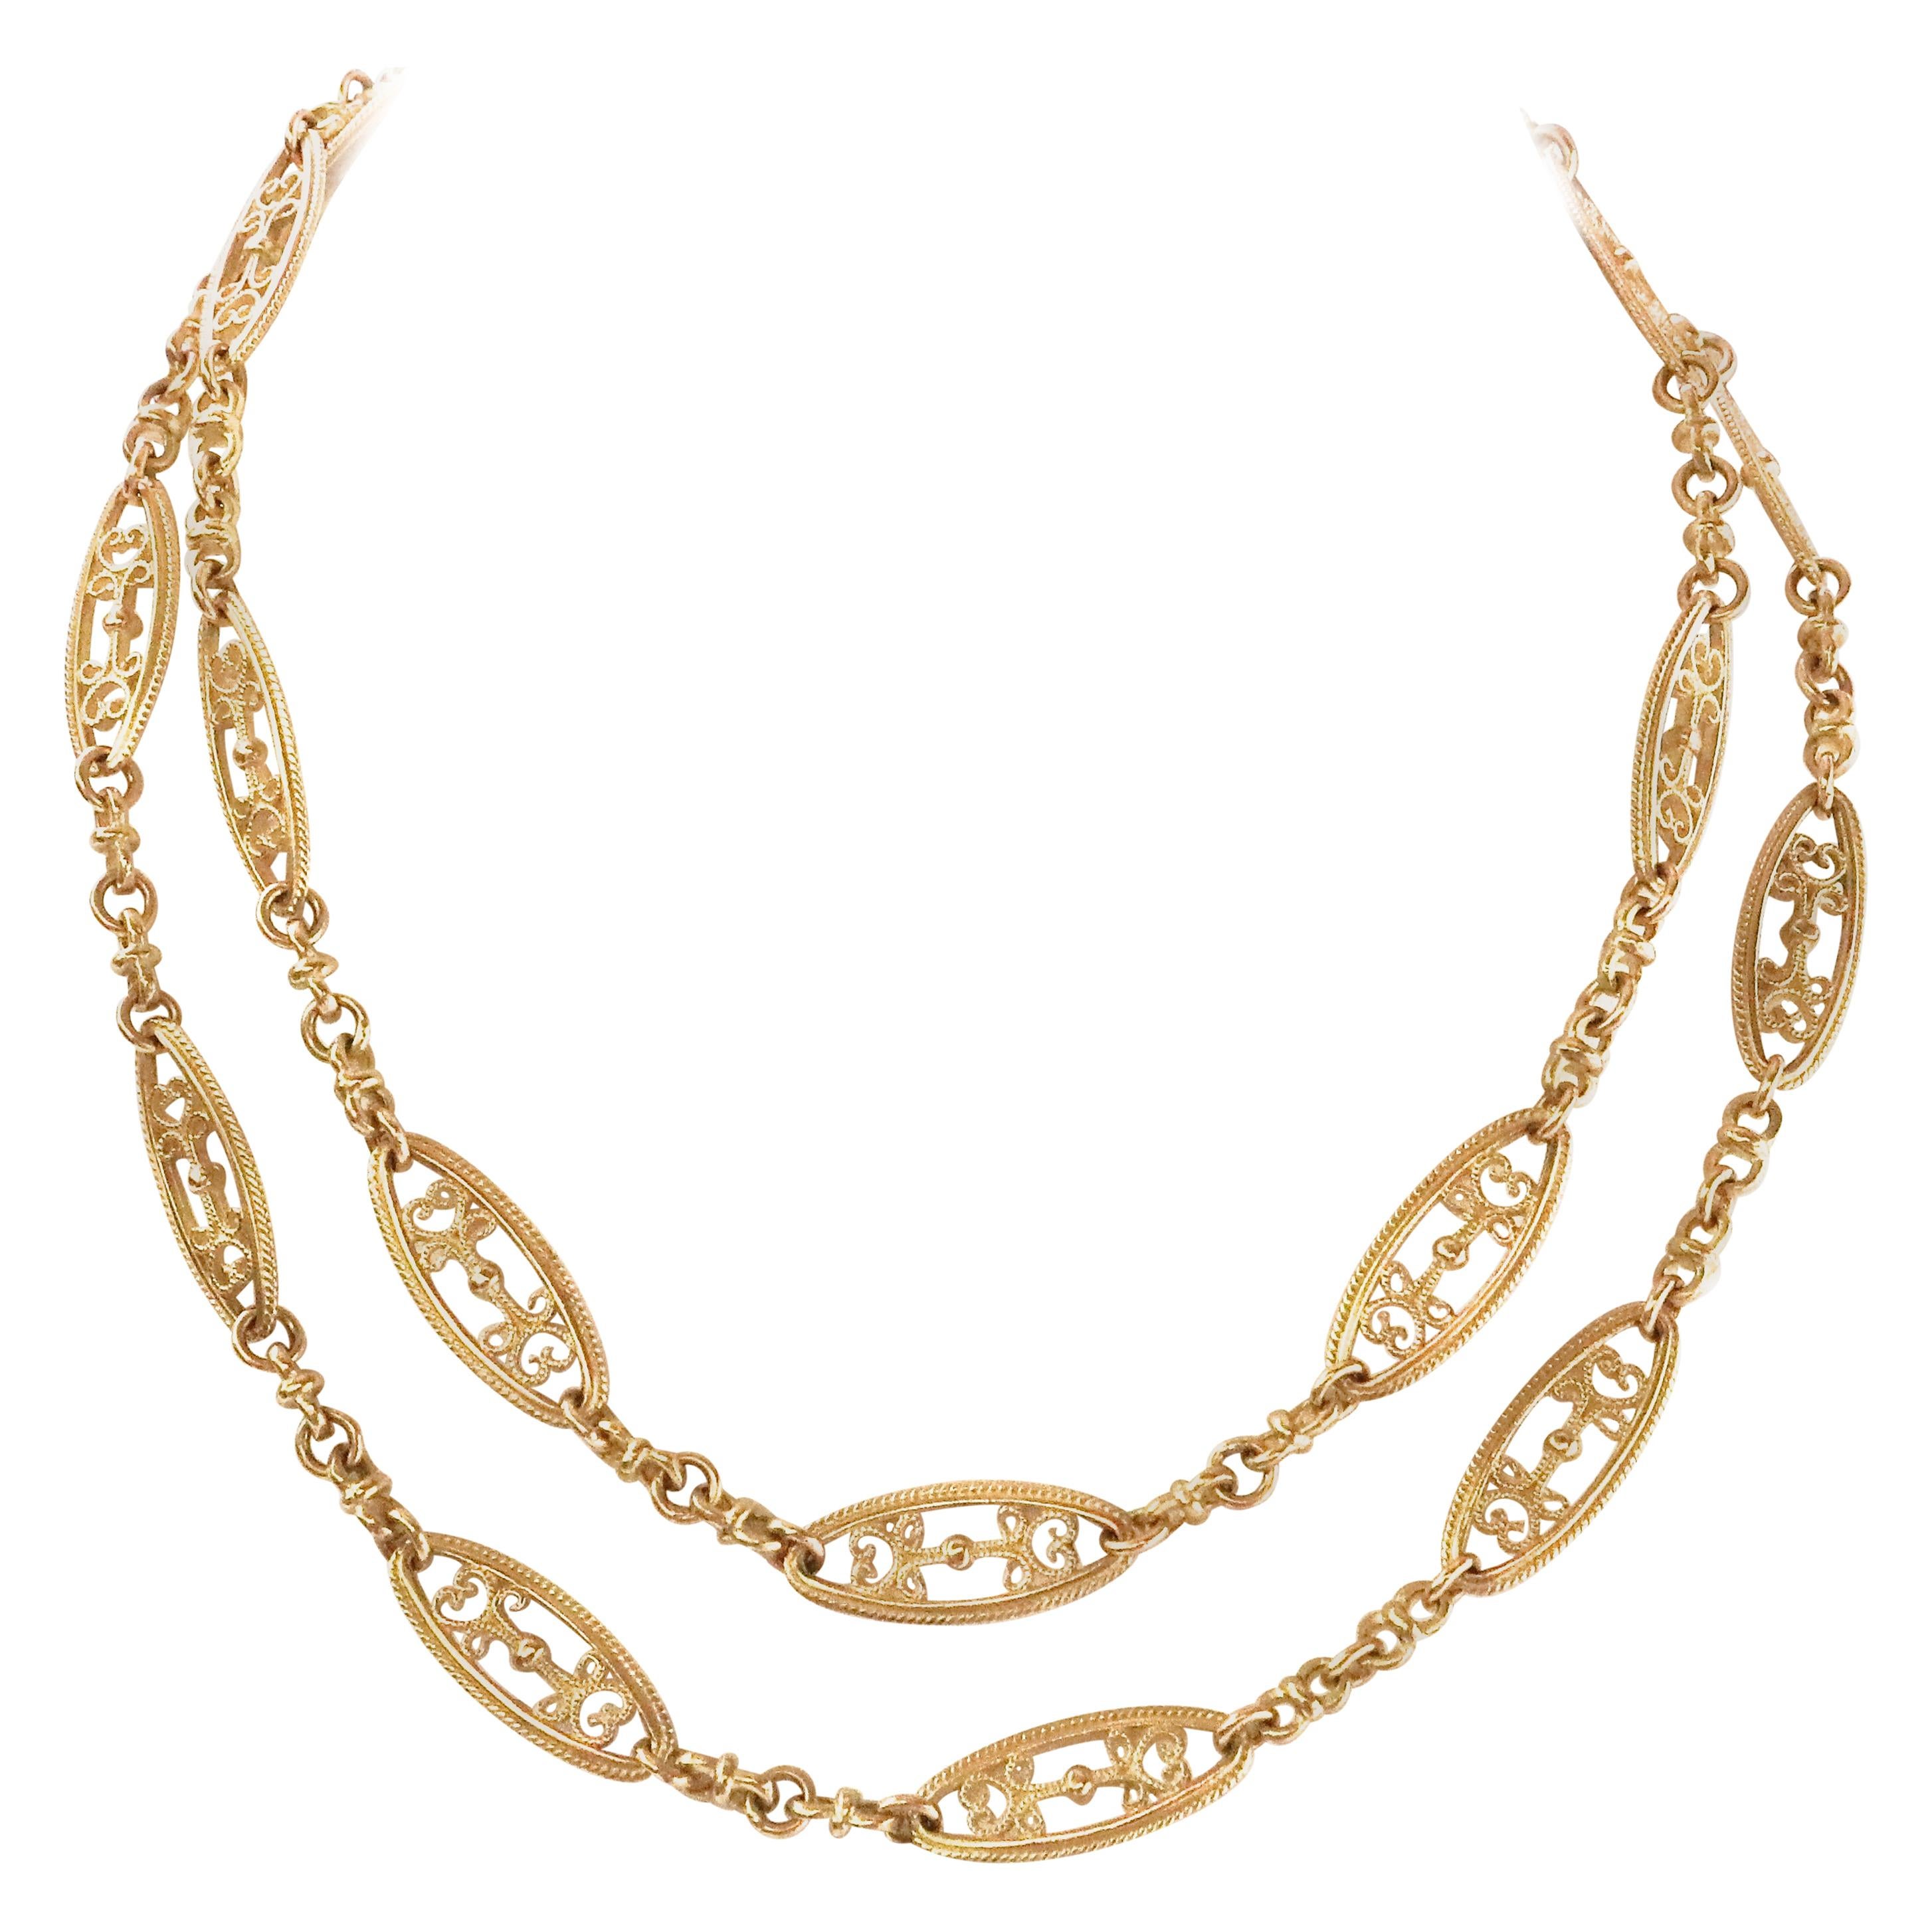 Antique French 18 Karat Yellow Gold Chain Necklace